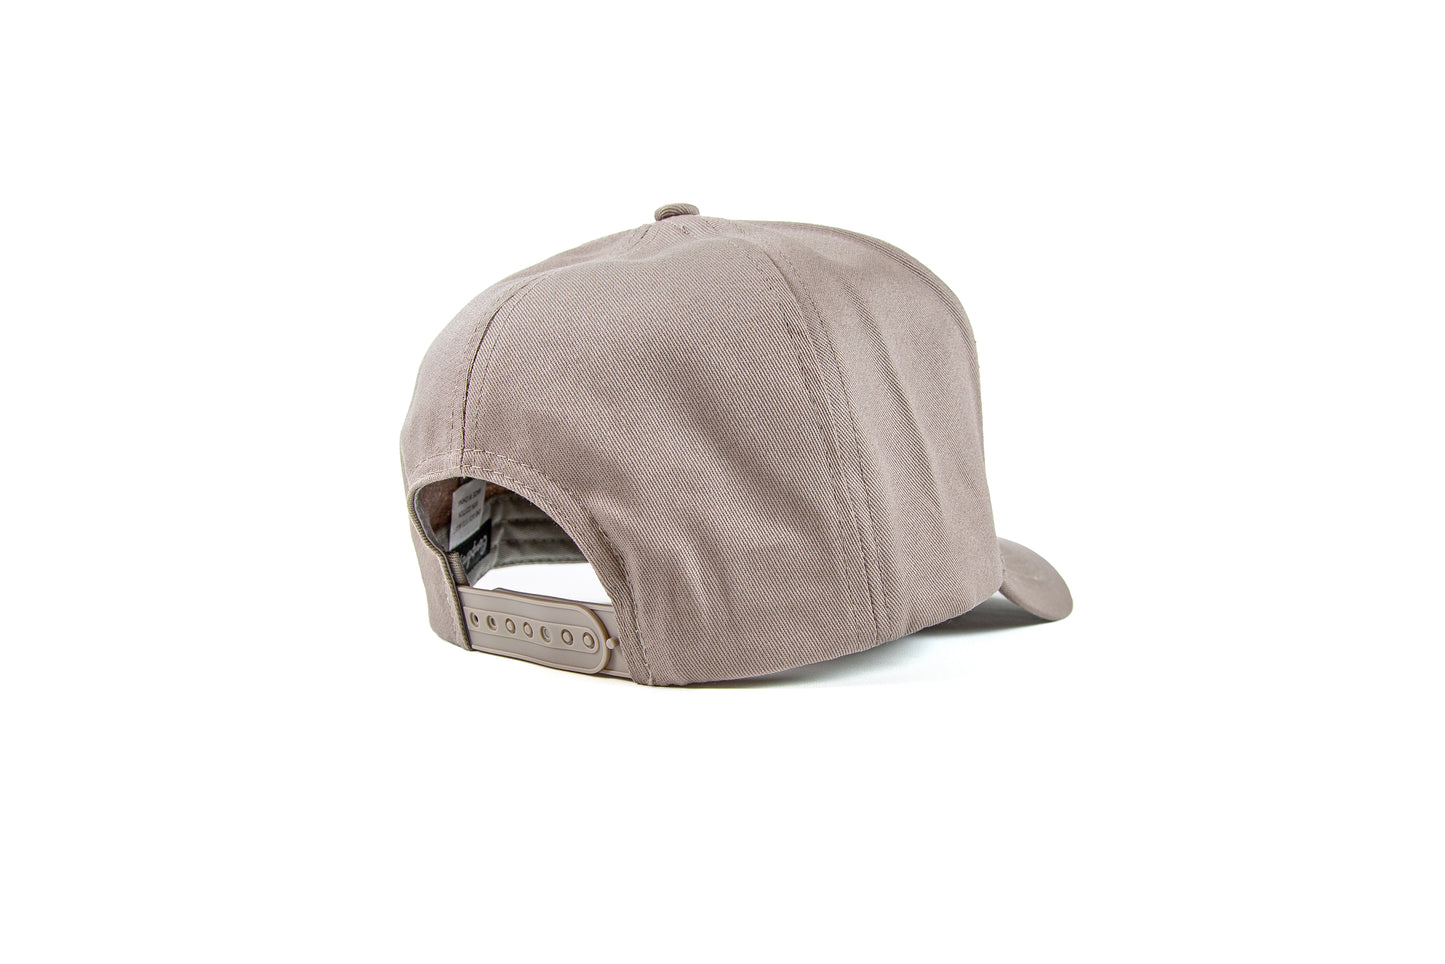 CLEARANCE- 3D Embroidery Grey Cotton Trucker Cap